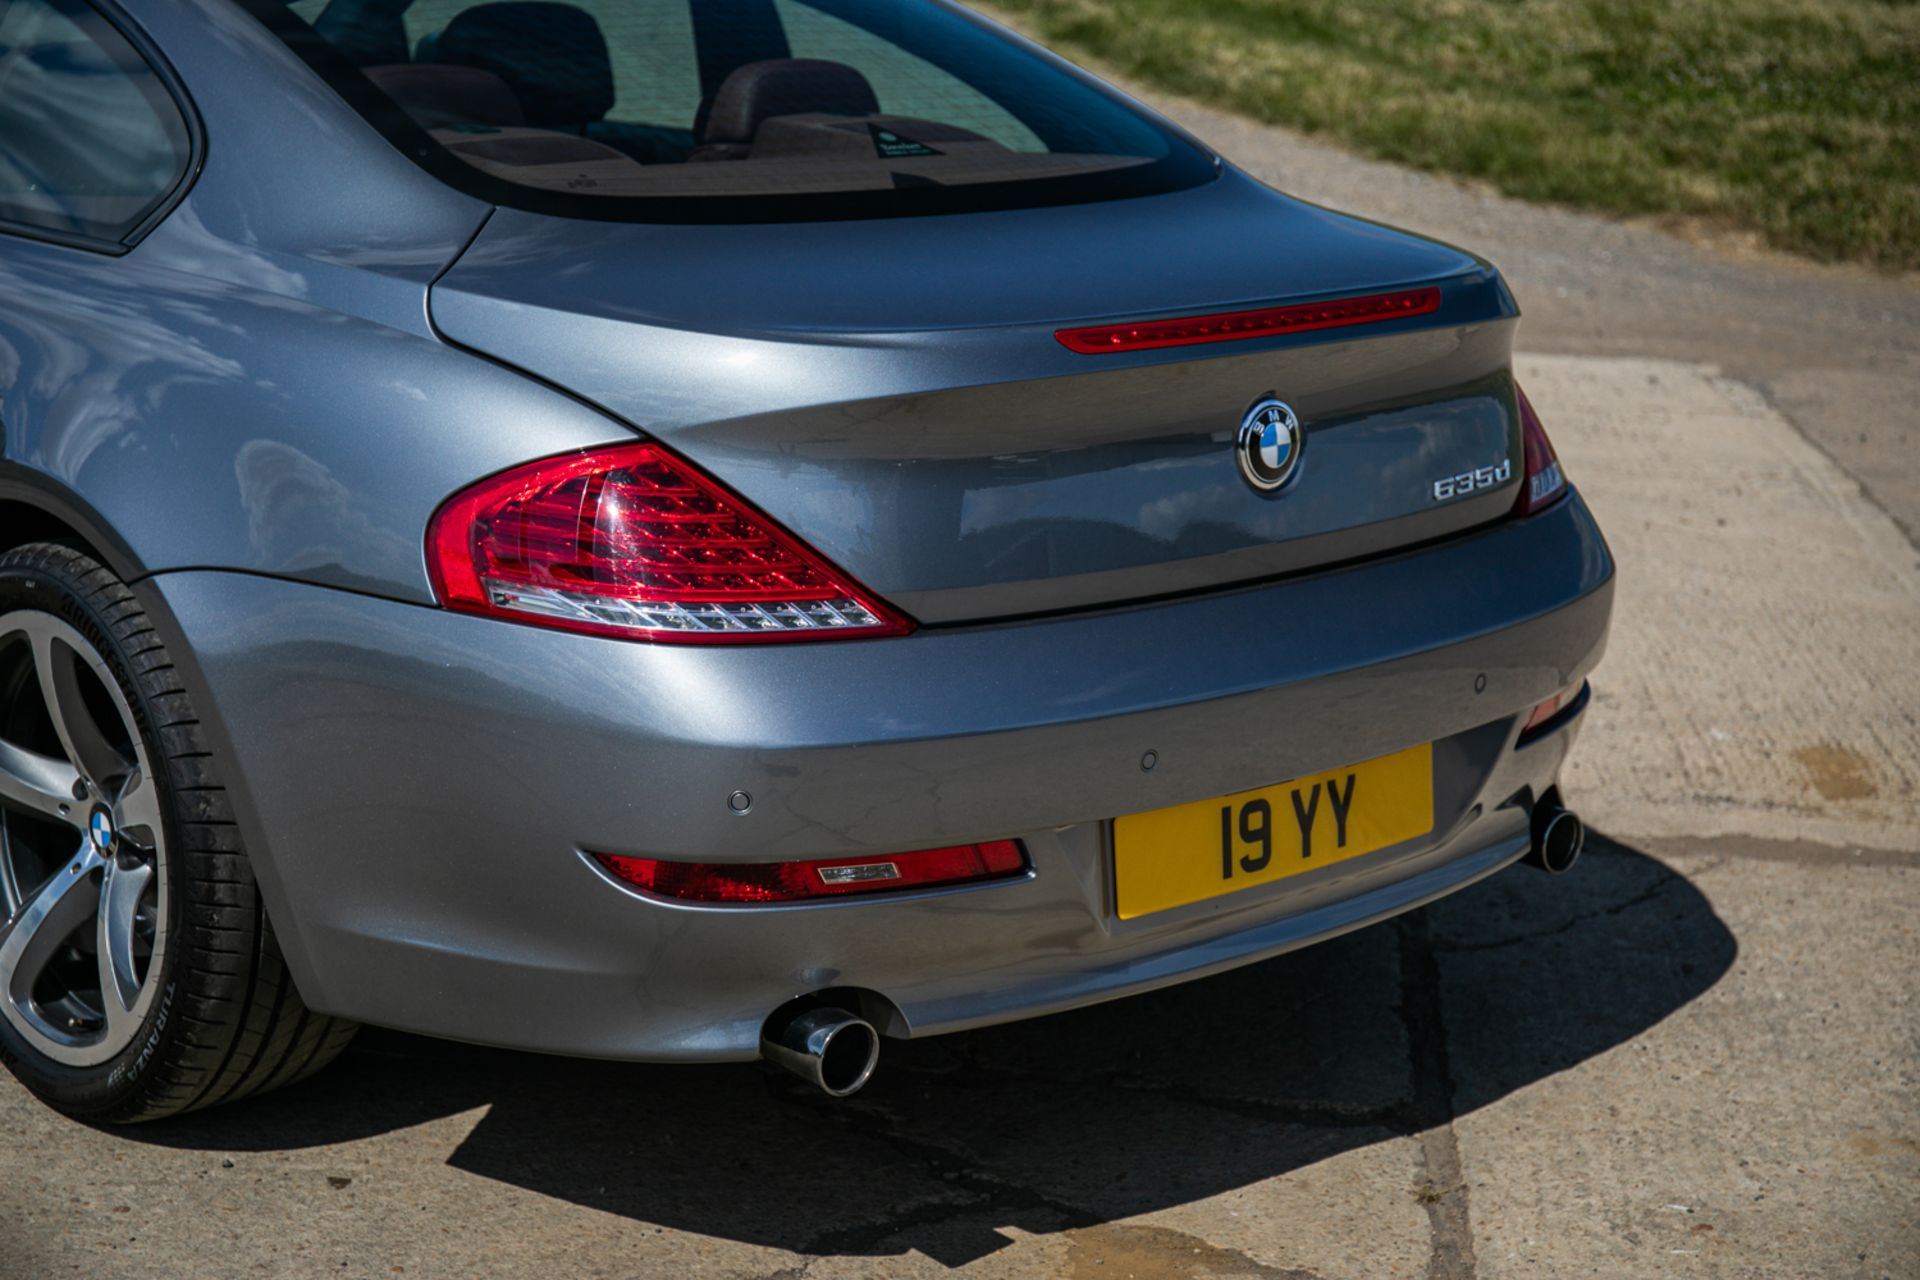 2010 BMW 635d (E63) Sport coupe - Image 10 of 20